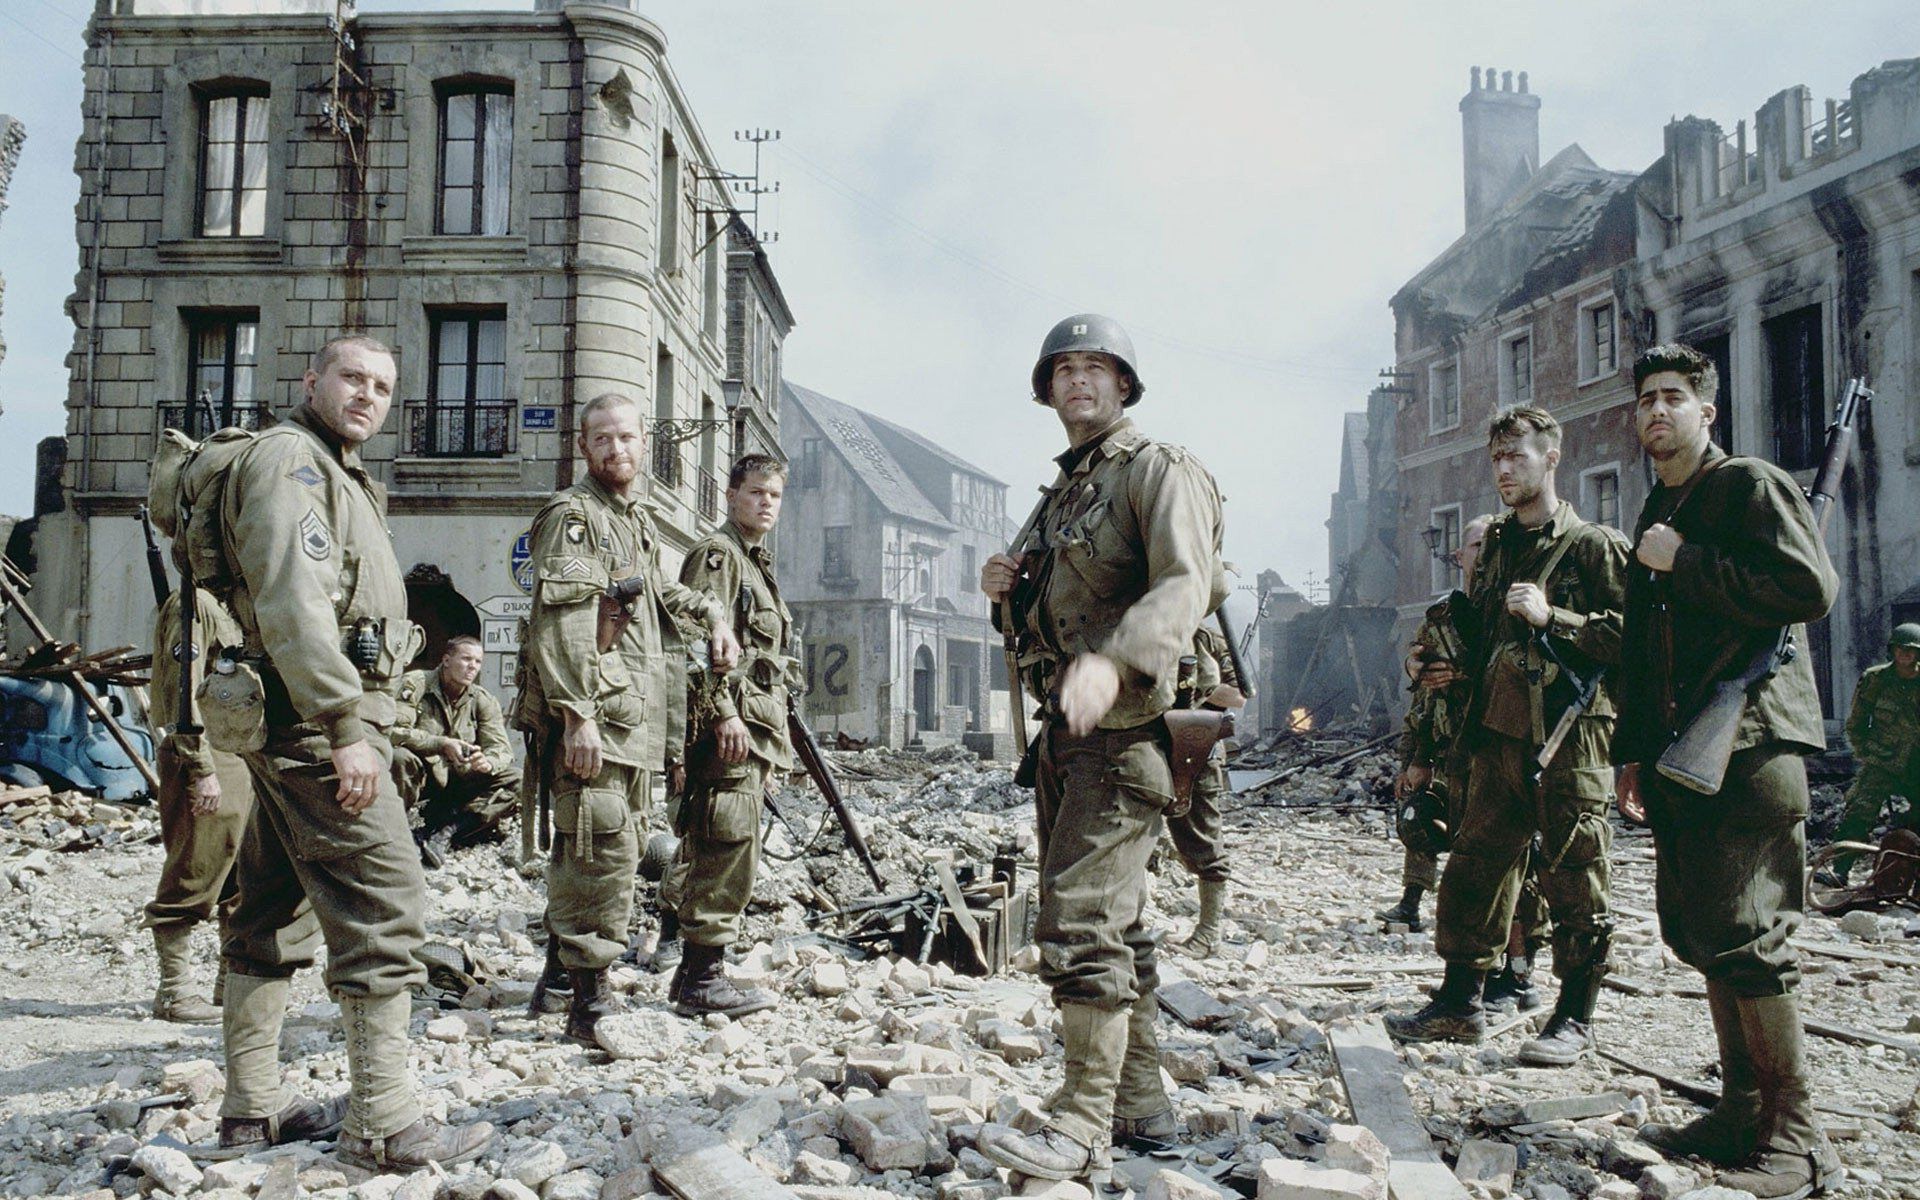 The View - The Cast of Saving Private Ryan 1998 (Part 2 of 4)